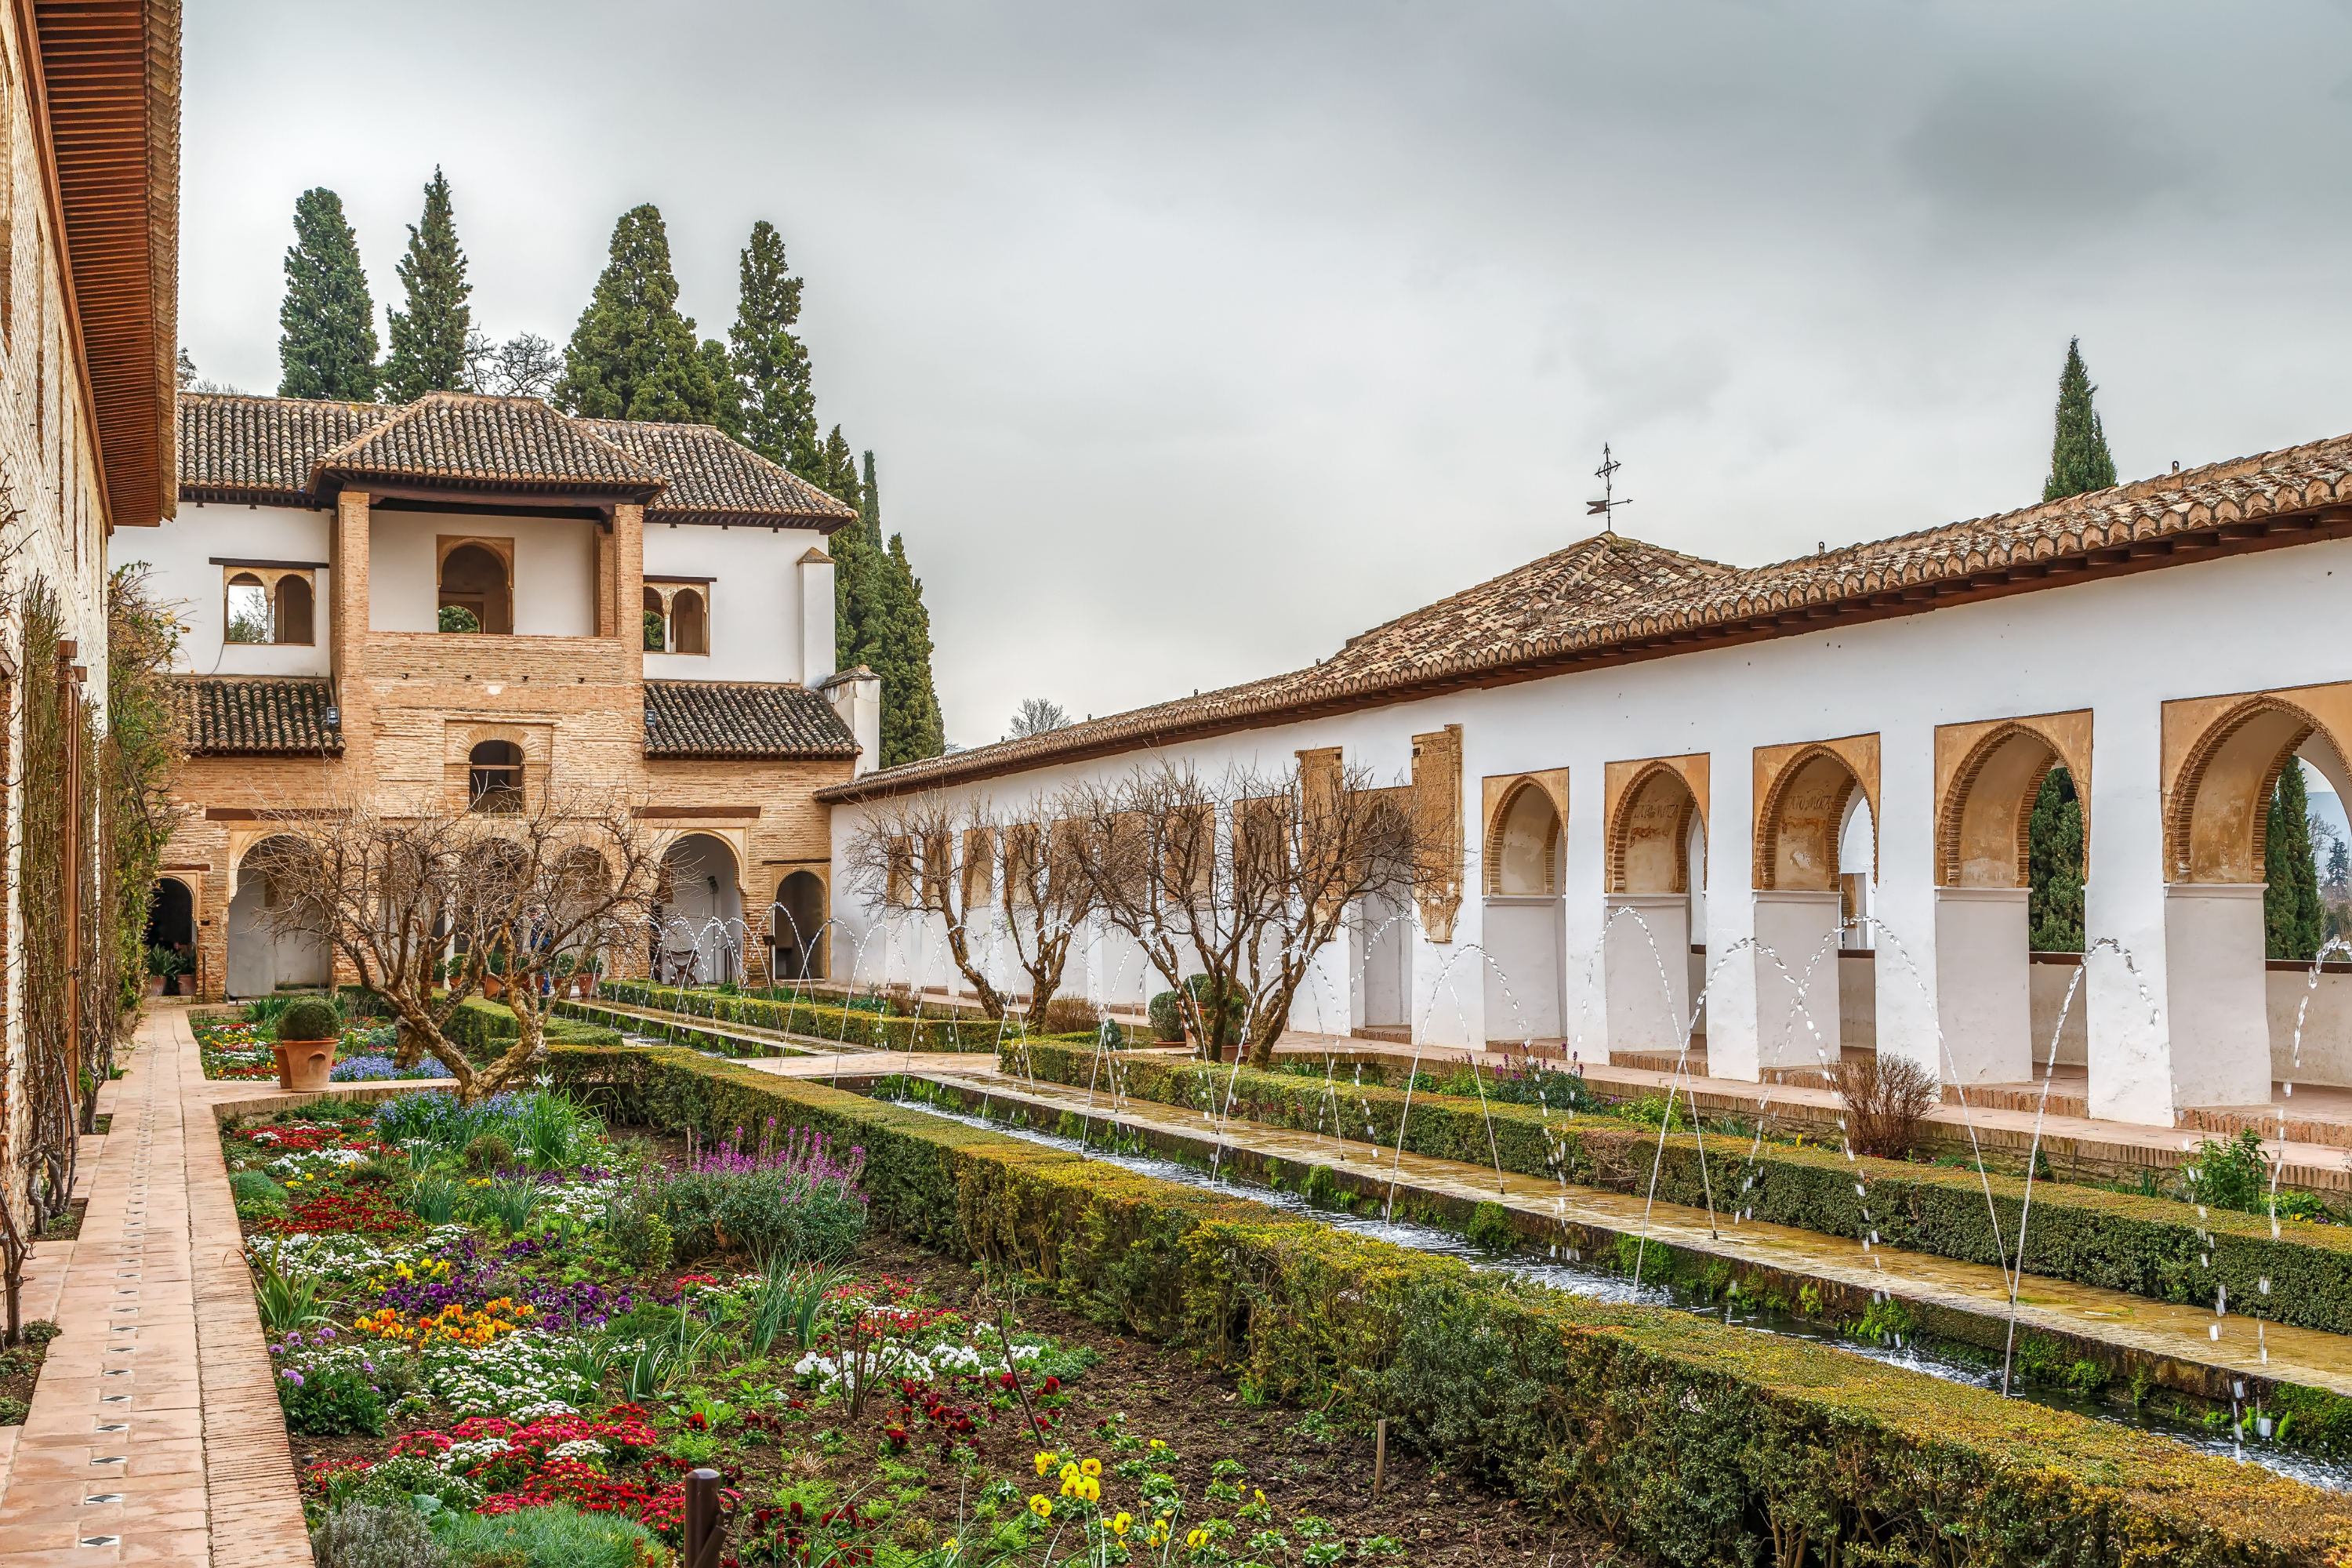 Granada Tour with Alhambra Palace and Generalife Gardens - Klook